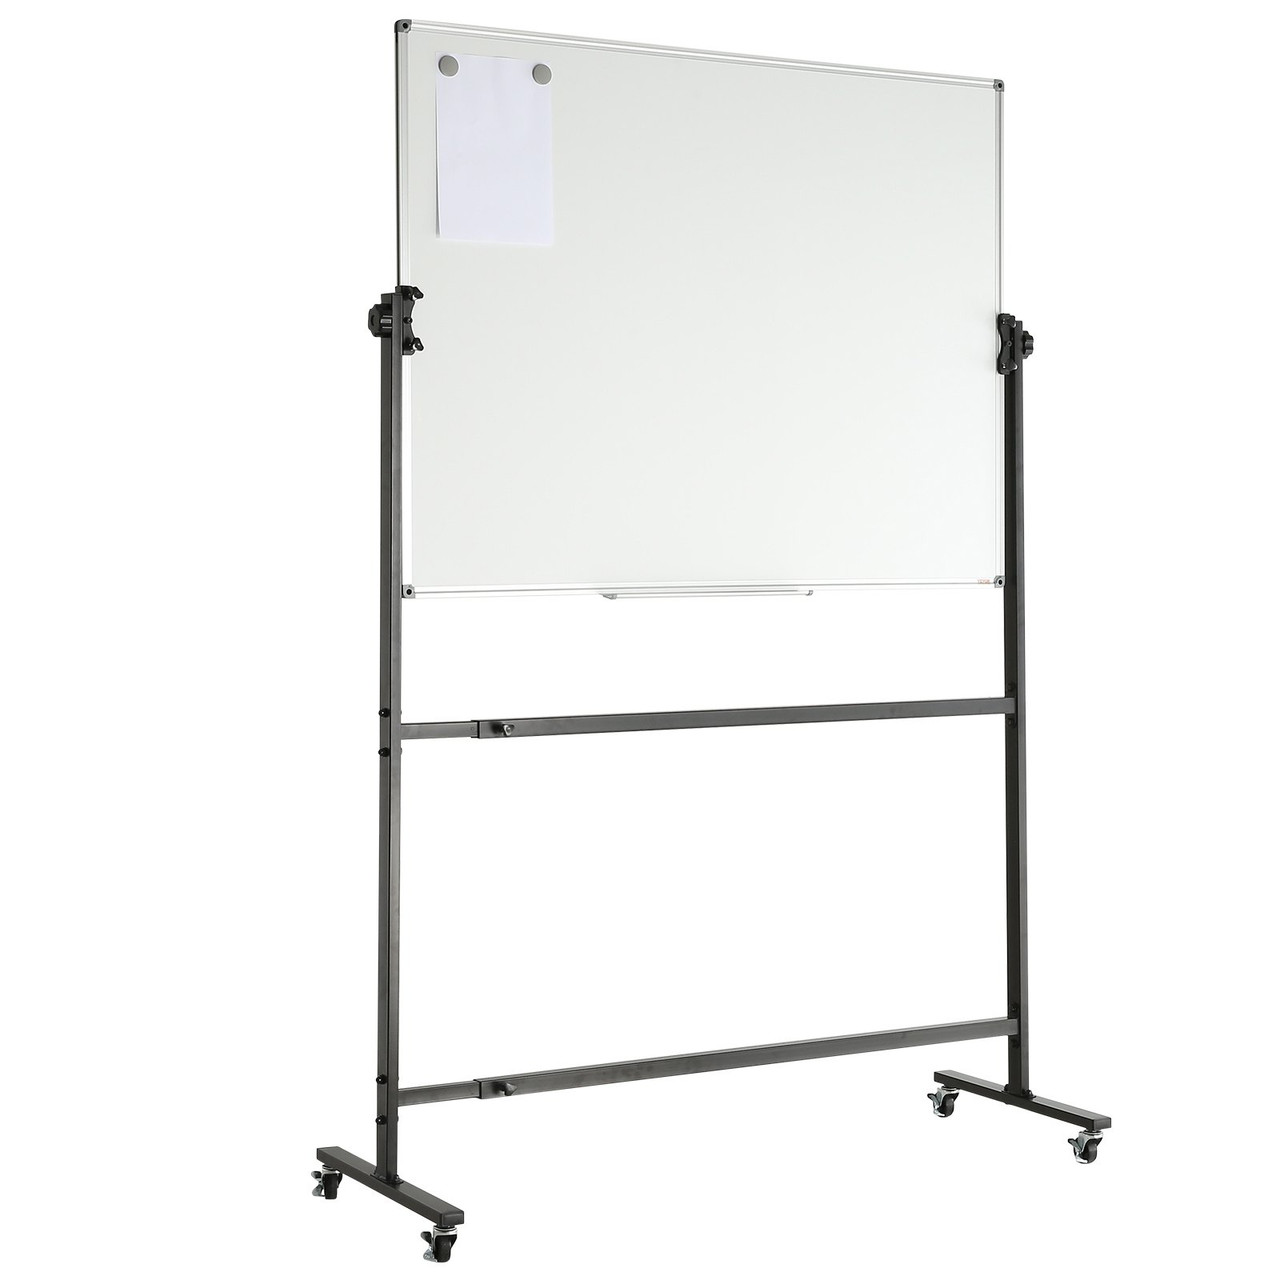 Rolling Magnetic Whiteboard, Double-sided Mobile Whiteboard 48x36 Inches, Adjustable Height Dry Erase Board with Wheels, 1 Magnetic Erase & 3 Dry Erase Markers & Movable Tray for Office School